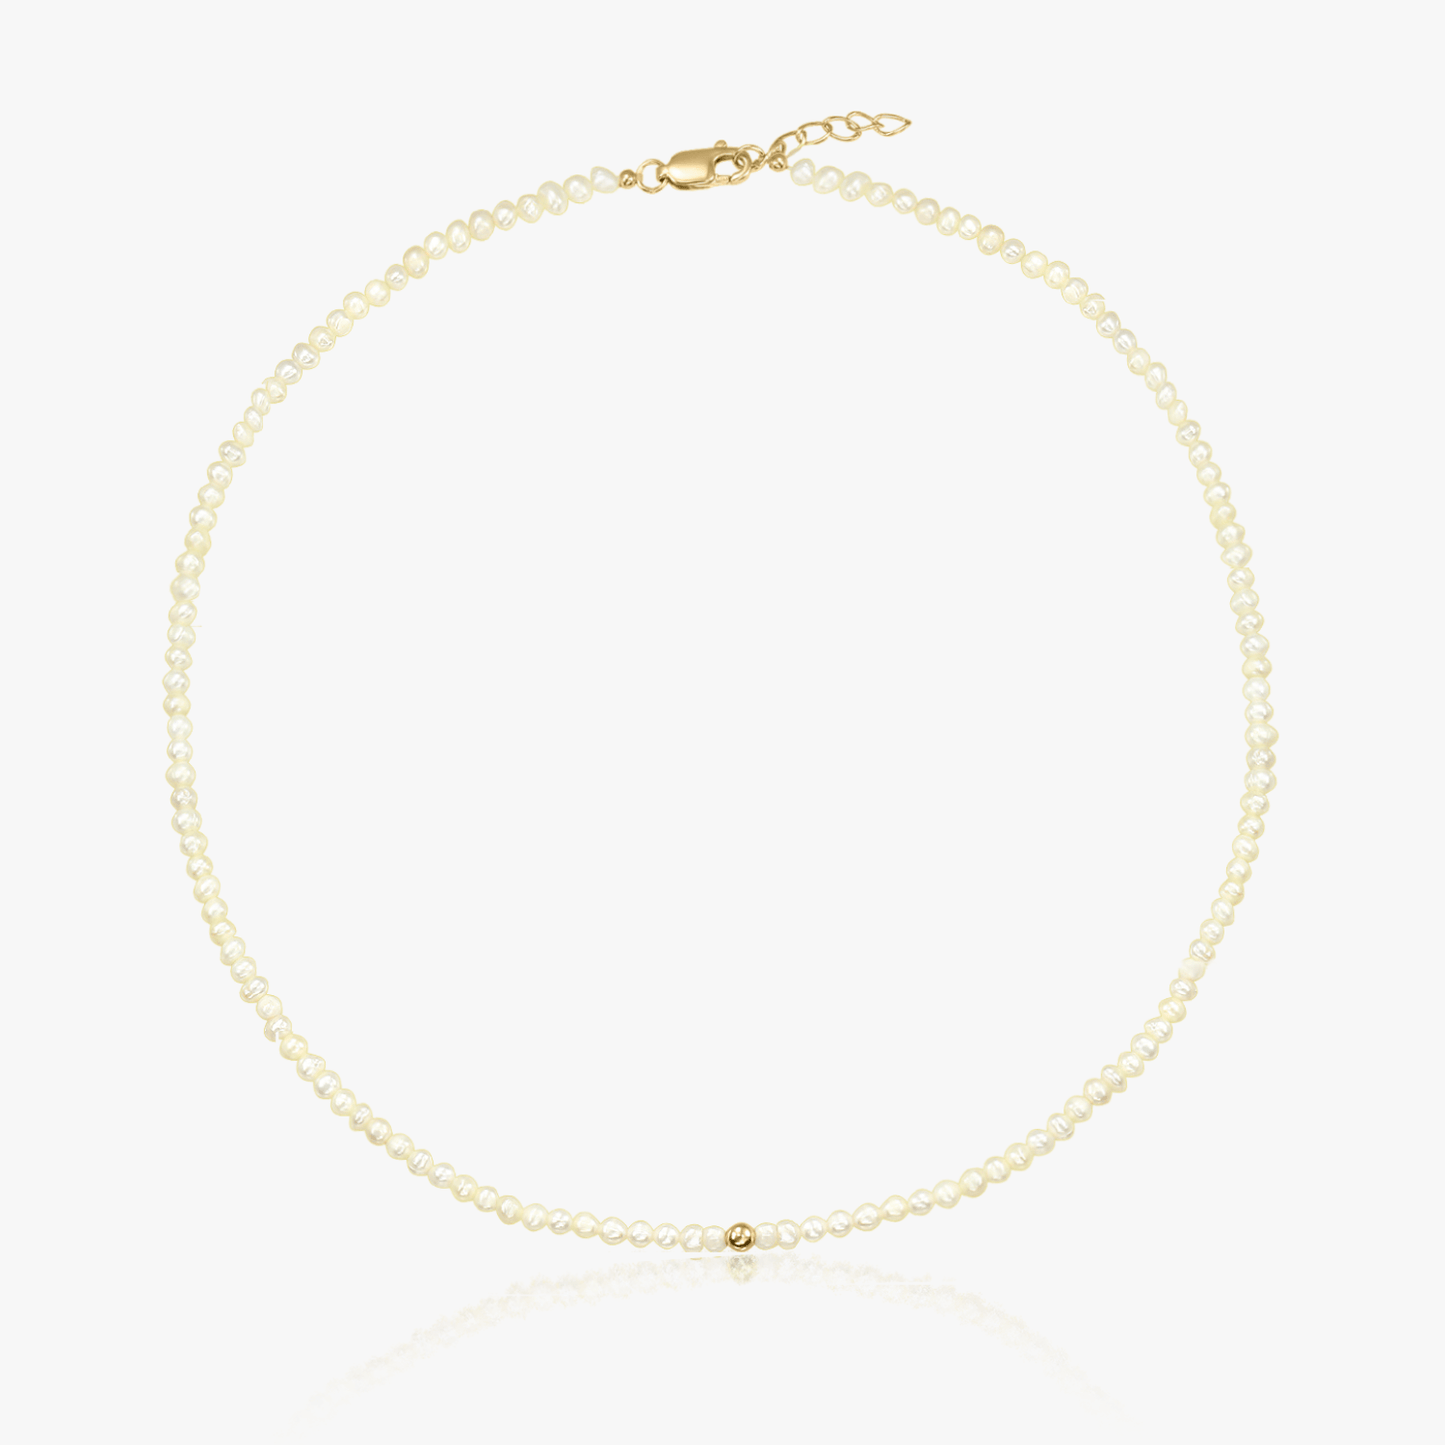 Glamor gold necklace - Natural pearls